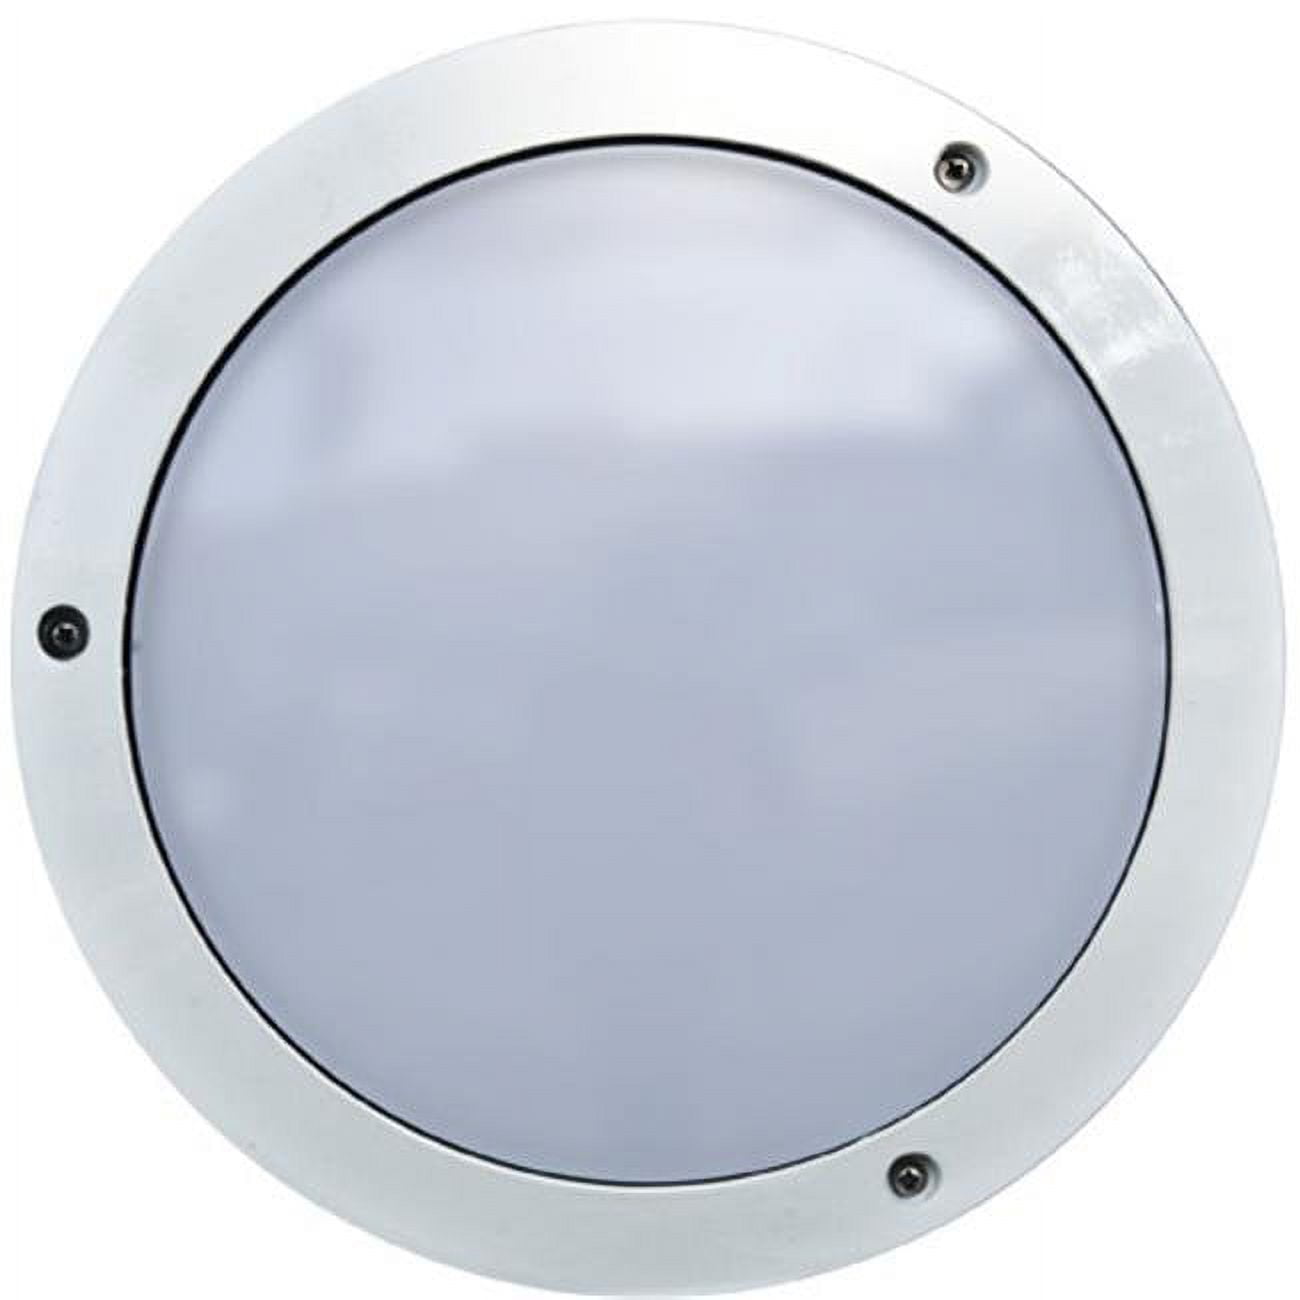 Picture of Dabmar Lighting W3900-W 10.50 x 10.50 x 2.75 in. 120 V 60 watts Incandenscent Type Powder Coated Cast Aluminum Surface Mounted Wall Fixture Light, White